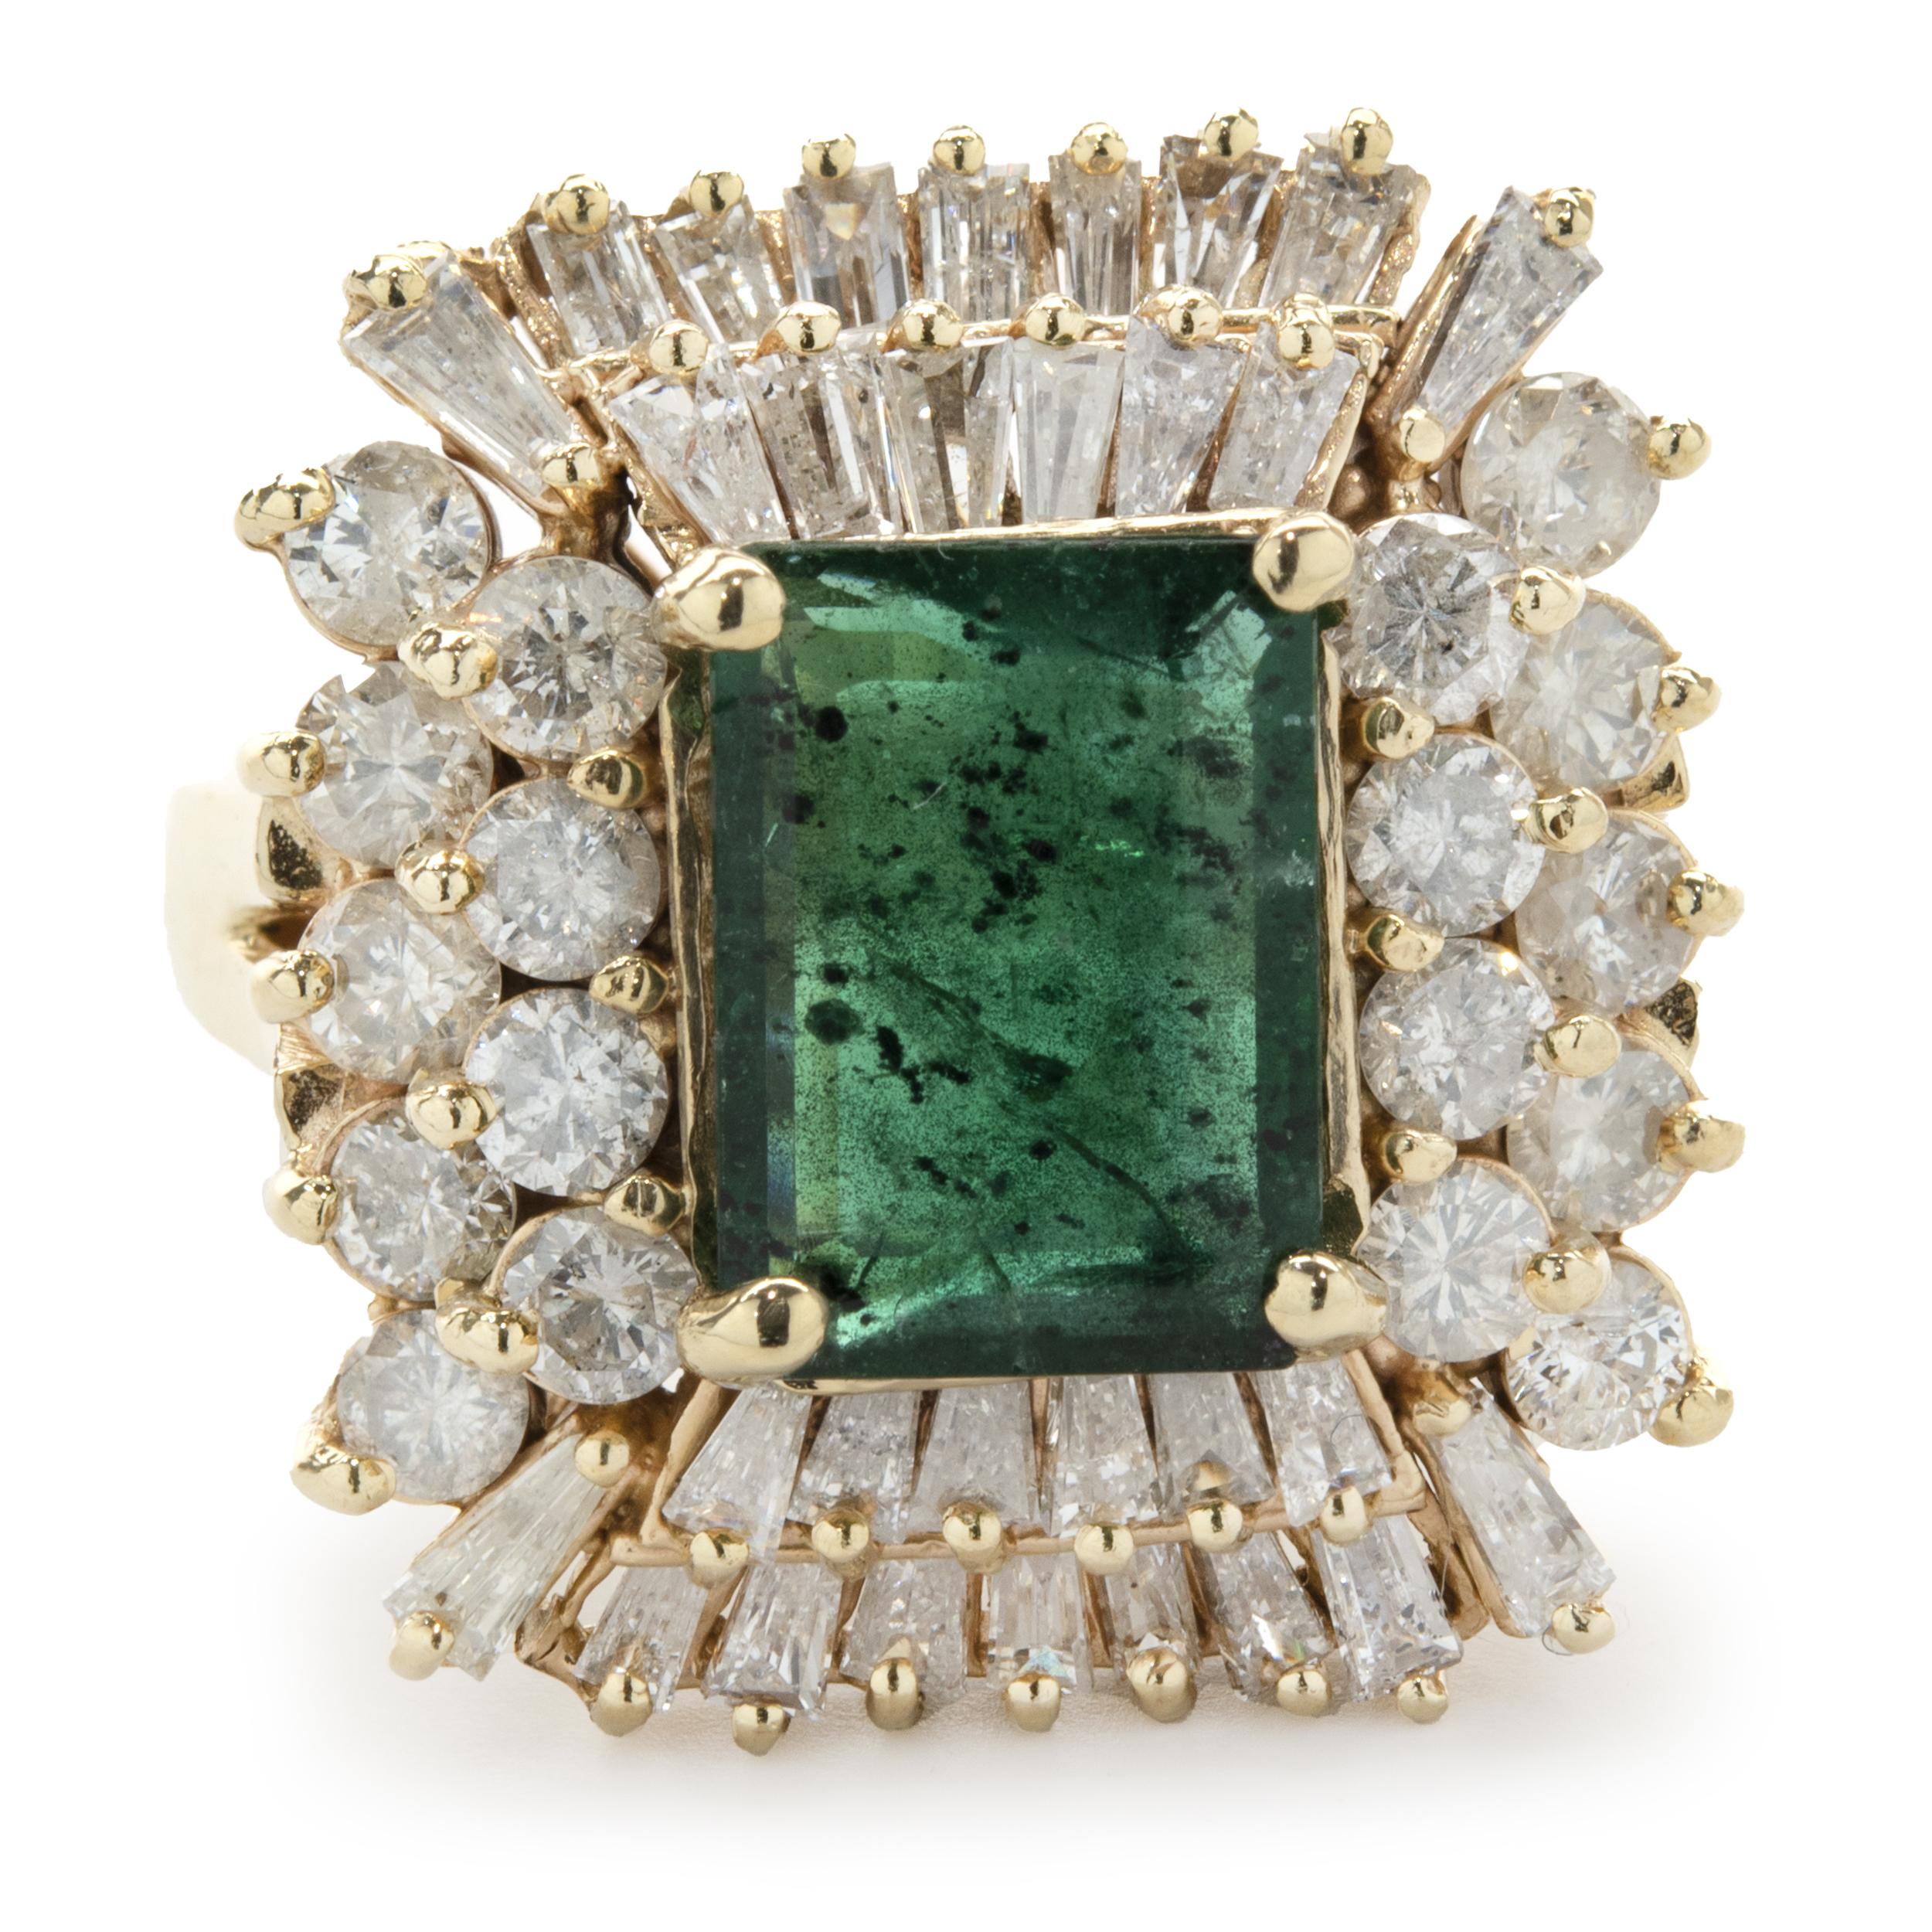 Designer: custom
Material: 14K yellow gold
Diamond: 32 round and baguette cut = 1.54cttw
Color: G
Clarity: SI1
Emerald: 1 emerald cut = 3.00ct
Dimensions: ring top measures 21mm
Ring Size: 7 (complimentary sizing available)
Weight: 11.42 grams